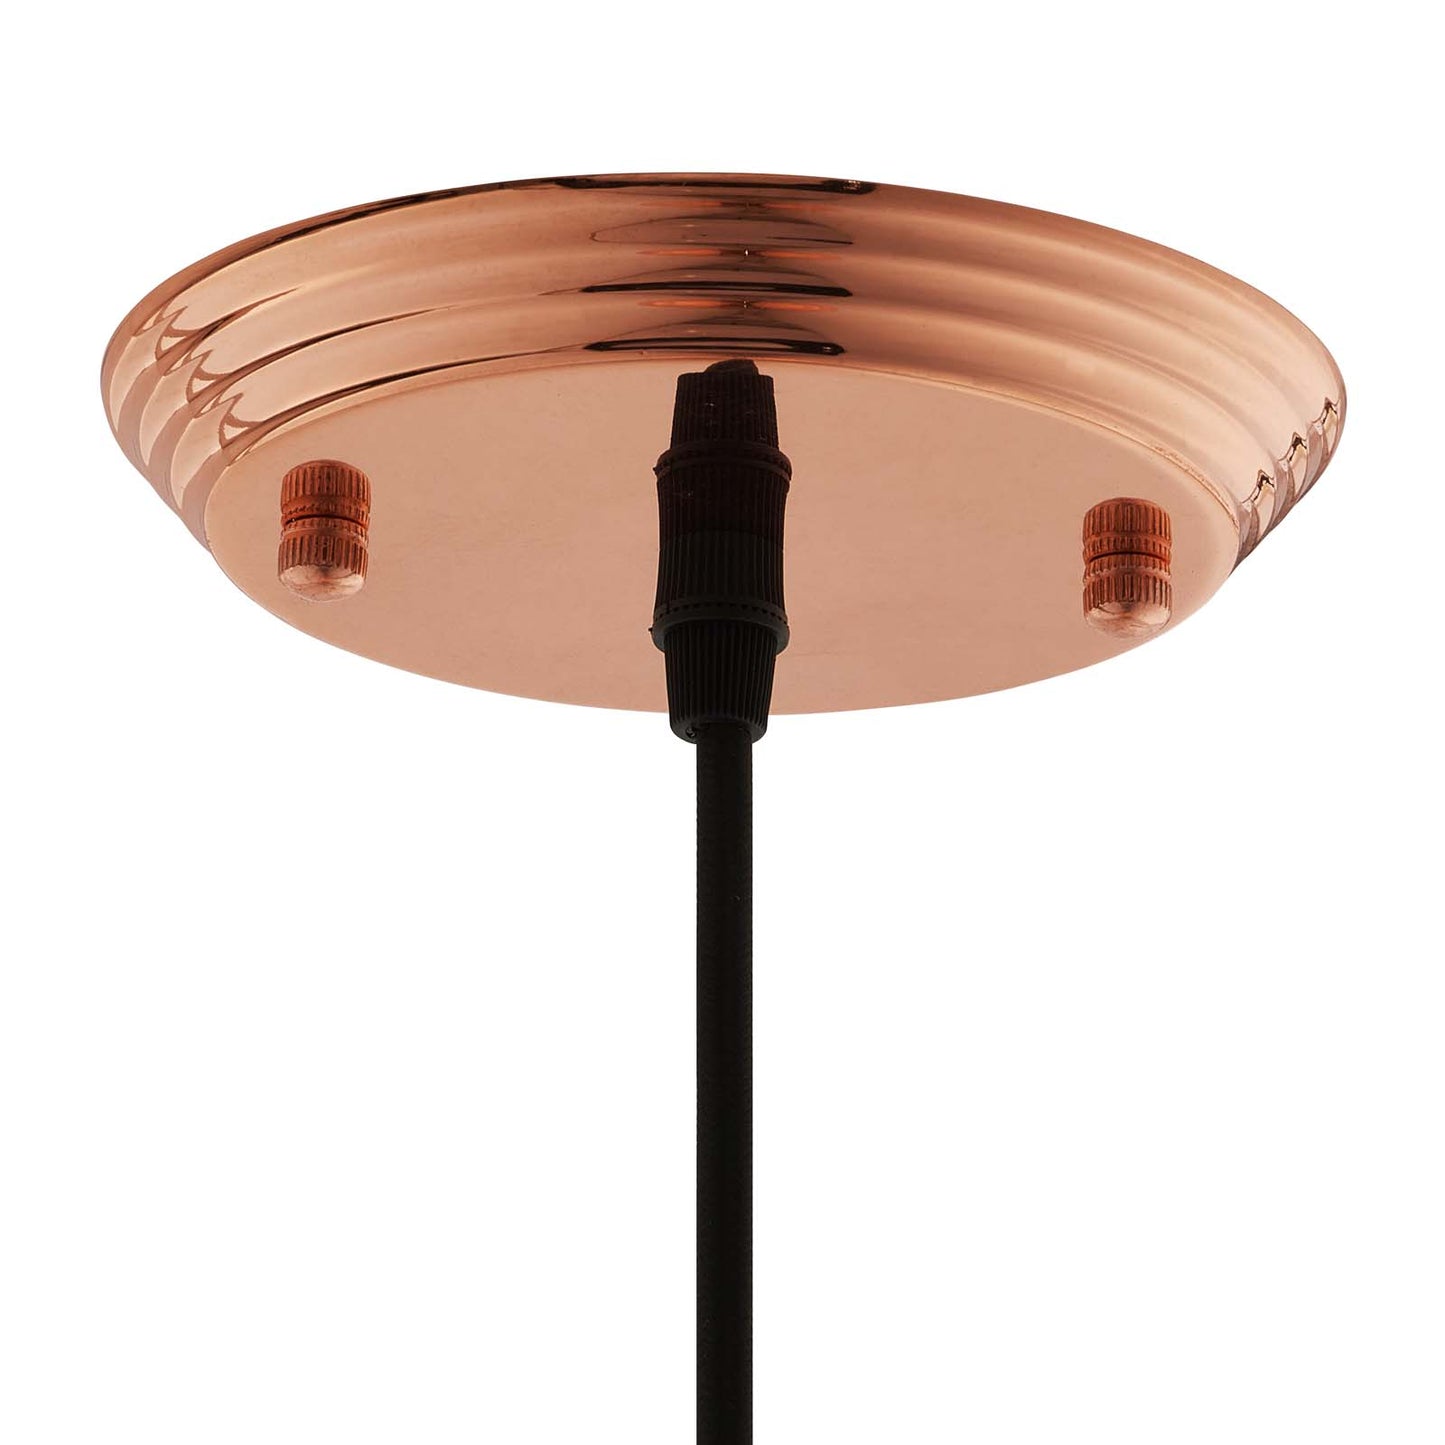 Dimple 11" Bell-Shaped Rose Gold Pendant Light  EEI-2904